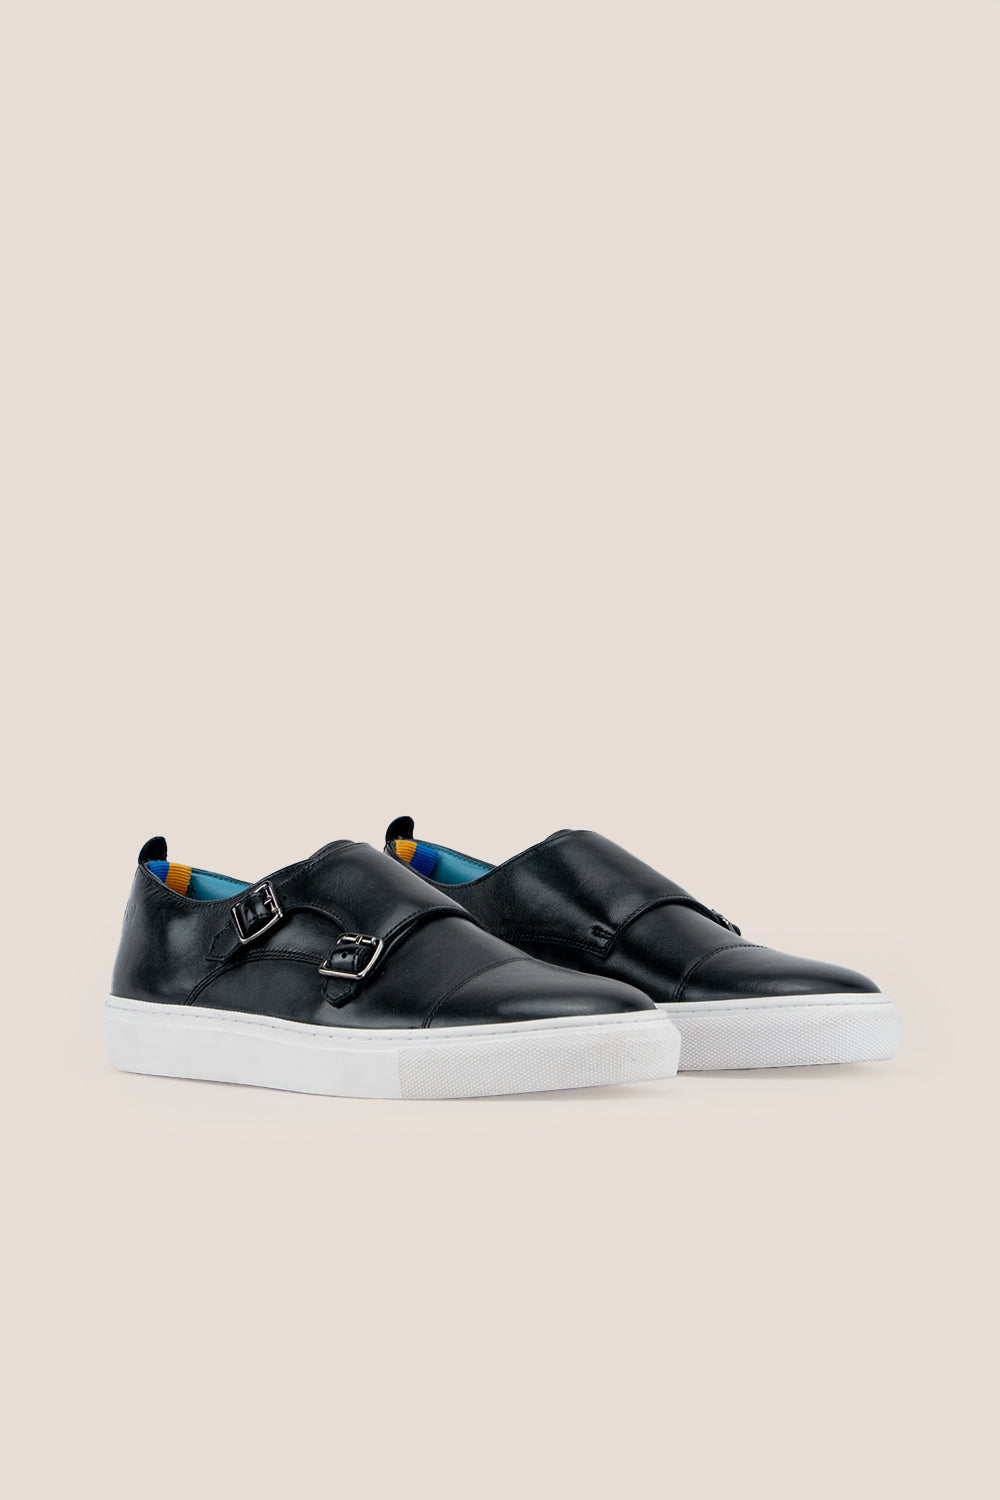 Nash Black Monk leather sneakers from Oswin Hyde